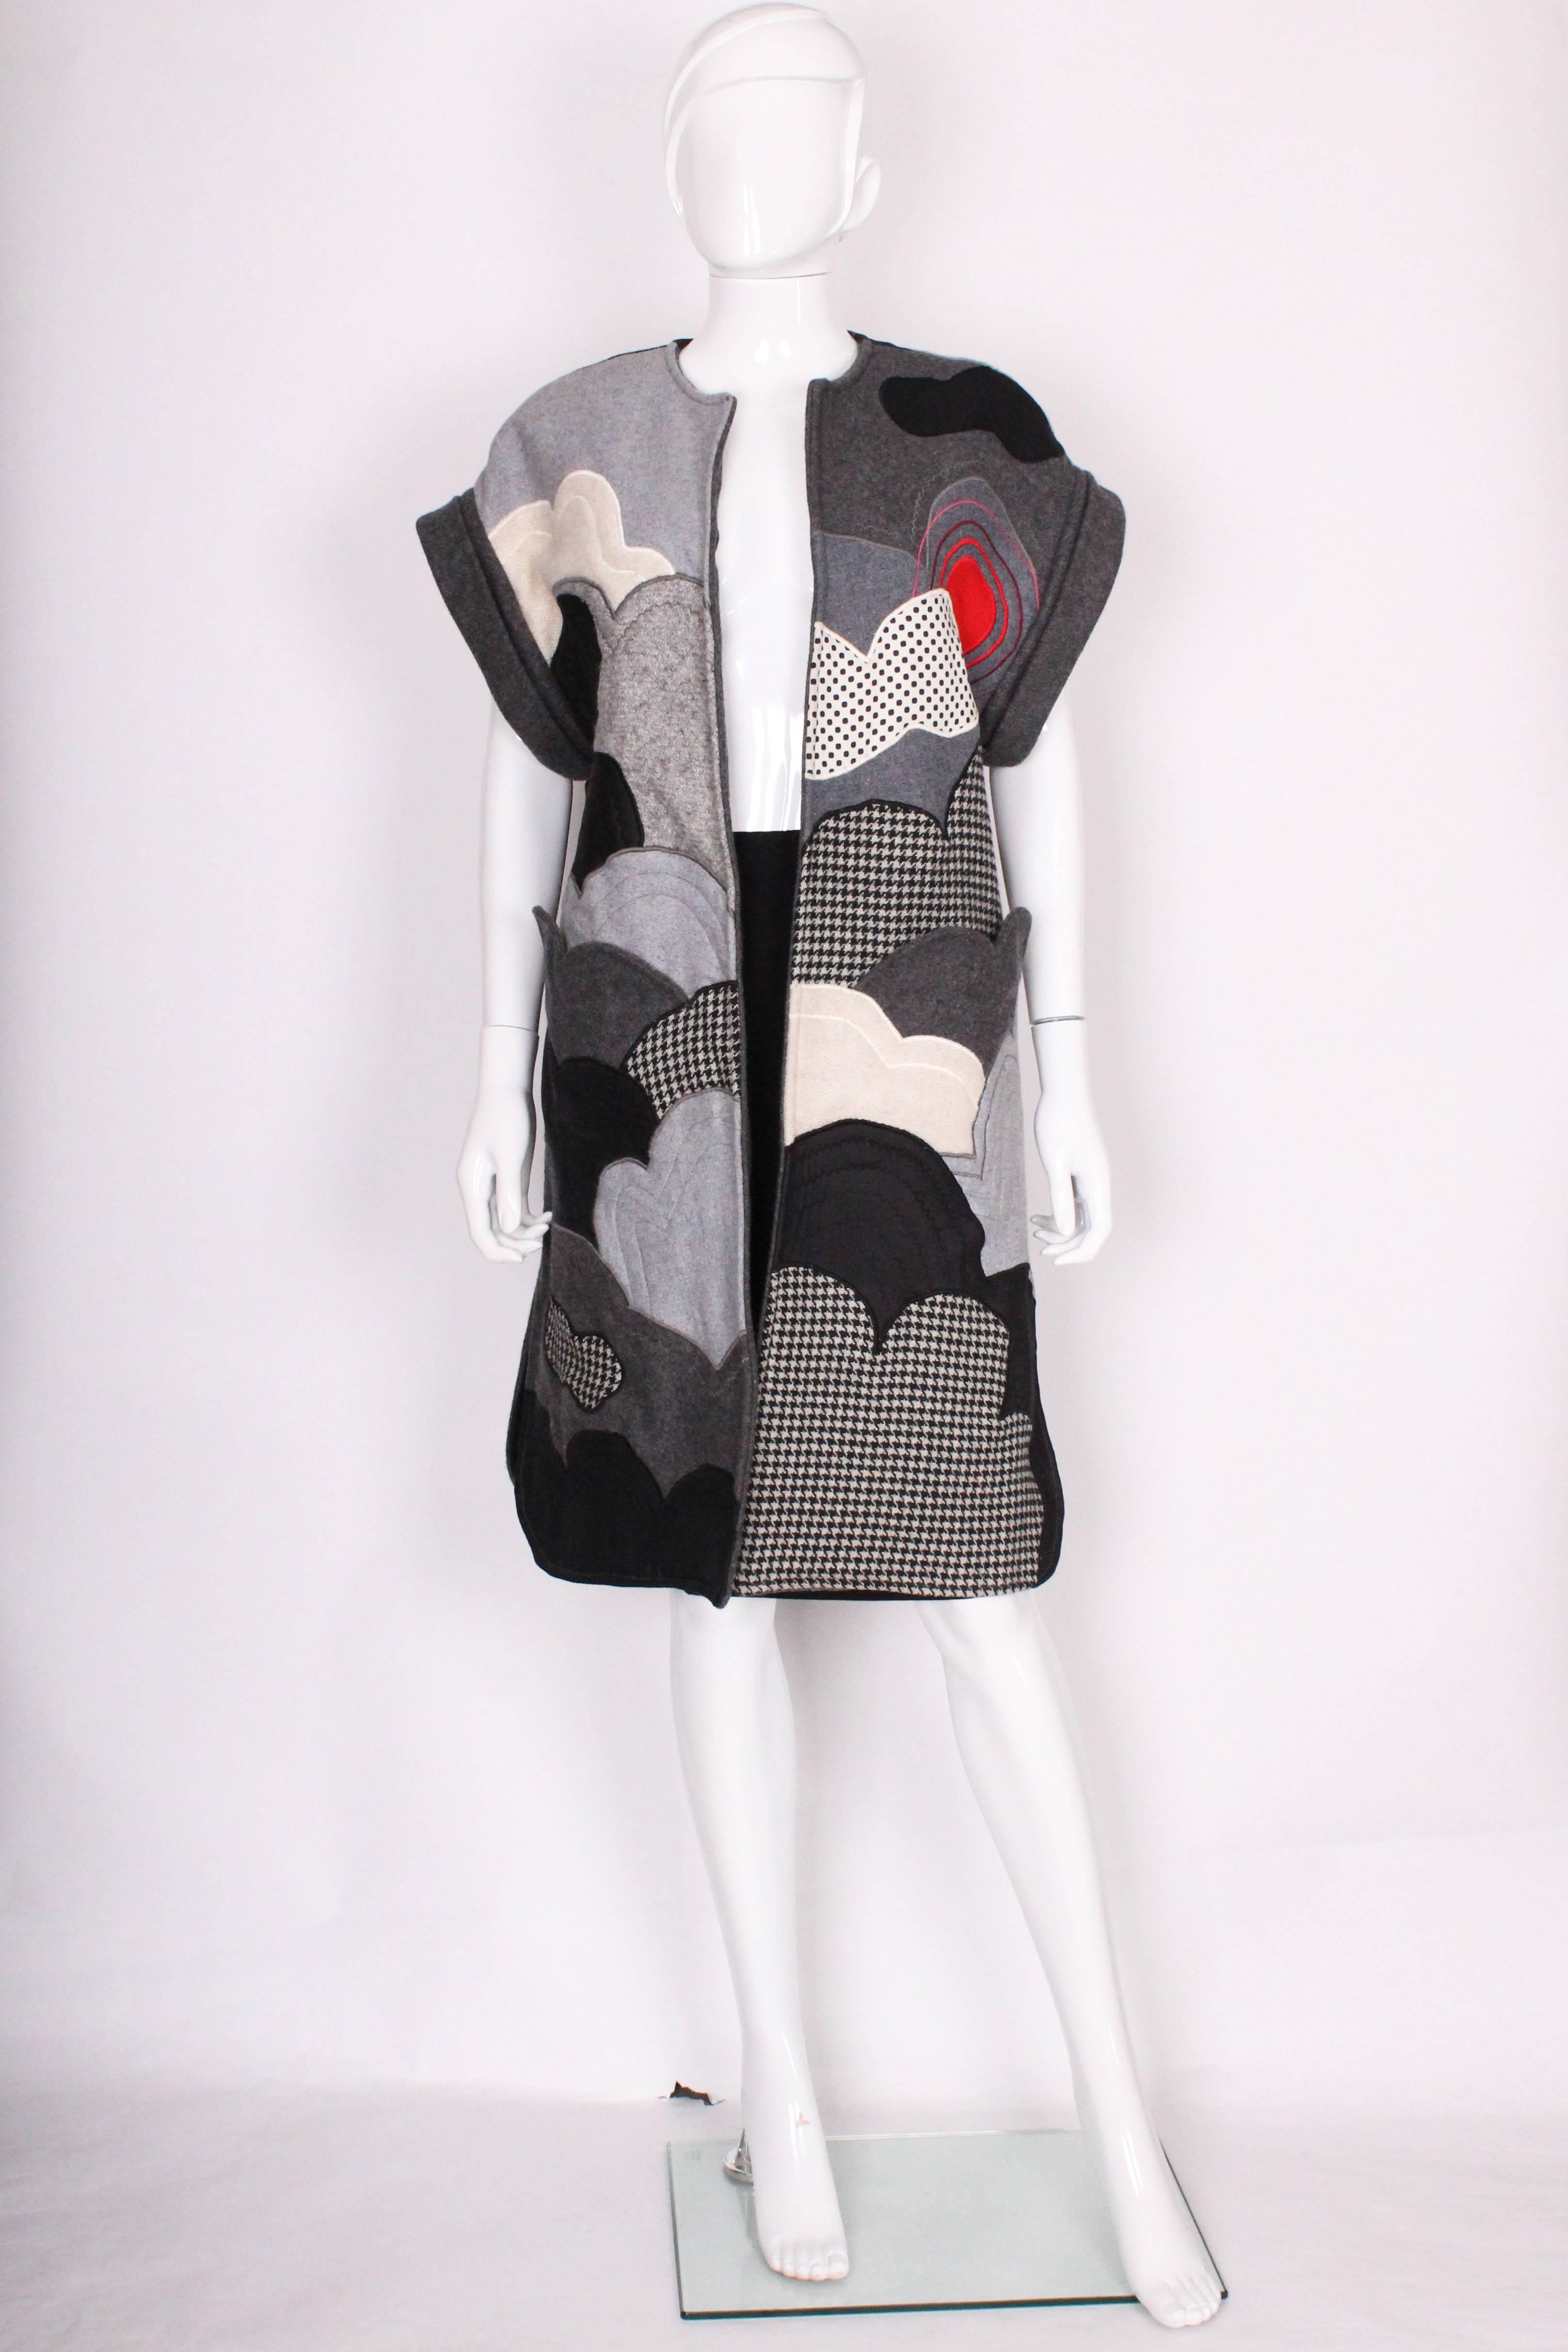 A great item for the coming months. This wool( fabric and knitted)  and cotton vest is by Tina,.and is wonderful for wearing over your work or play clothes. It is a fun design of various wool 'clouds' and has two pockets with scalloped edges. It is